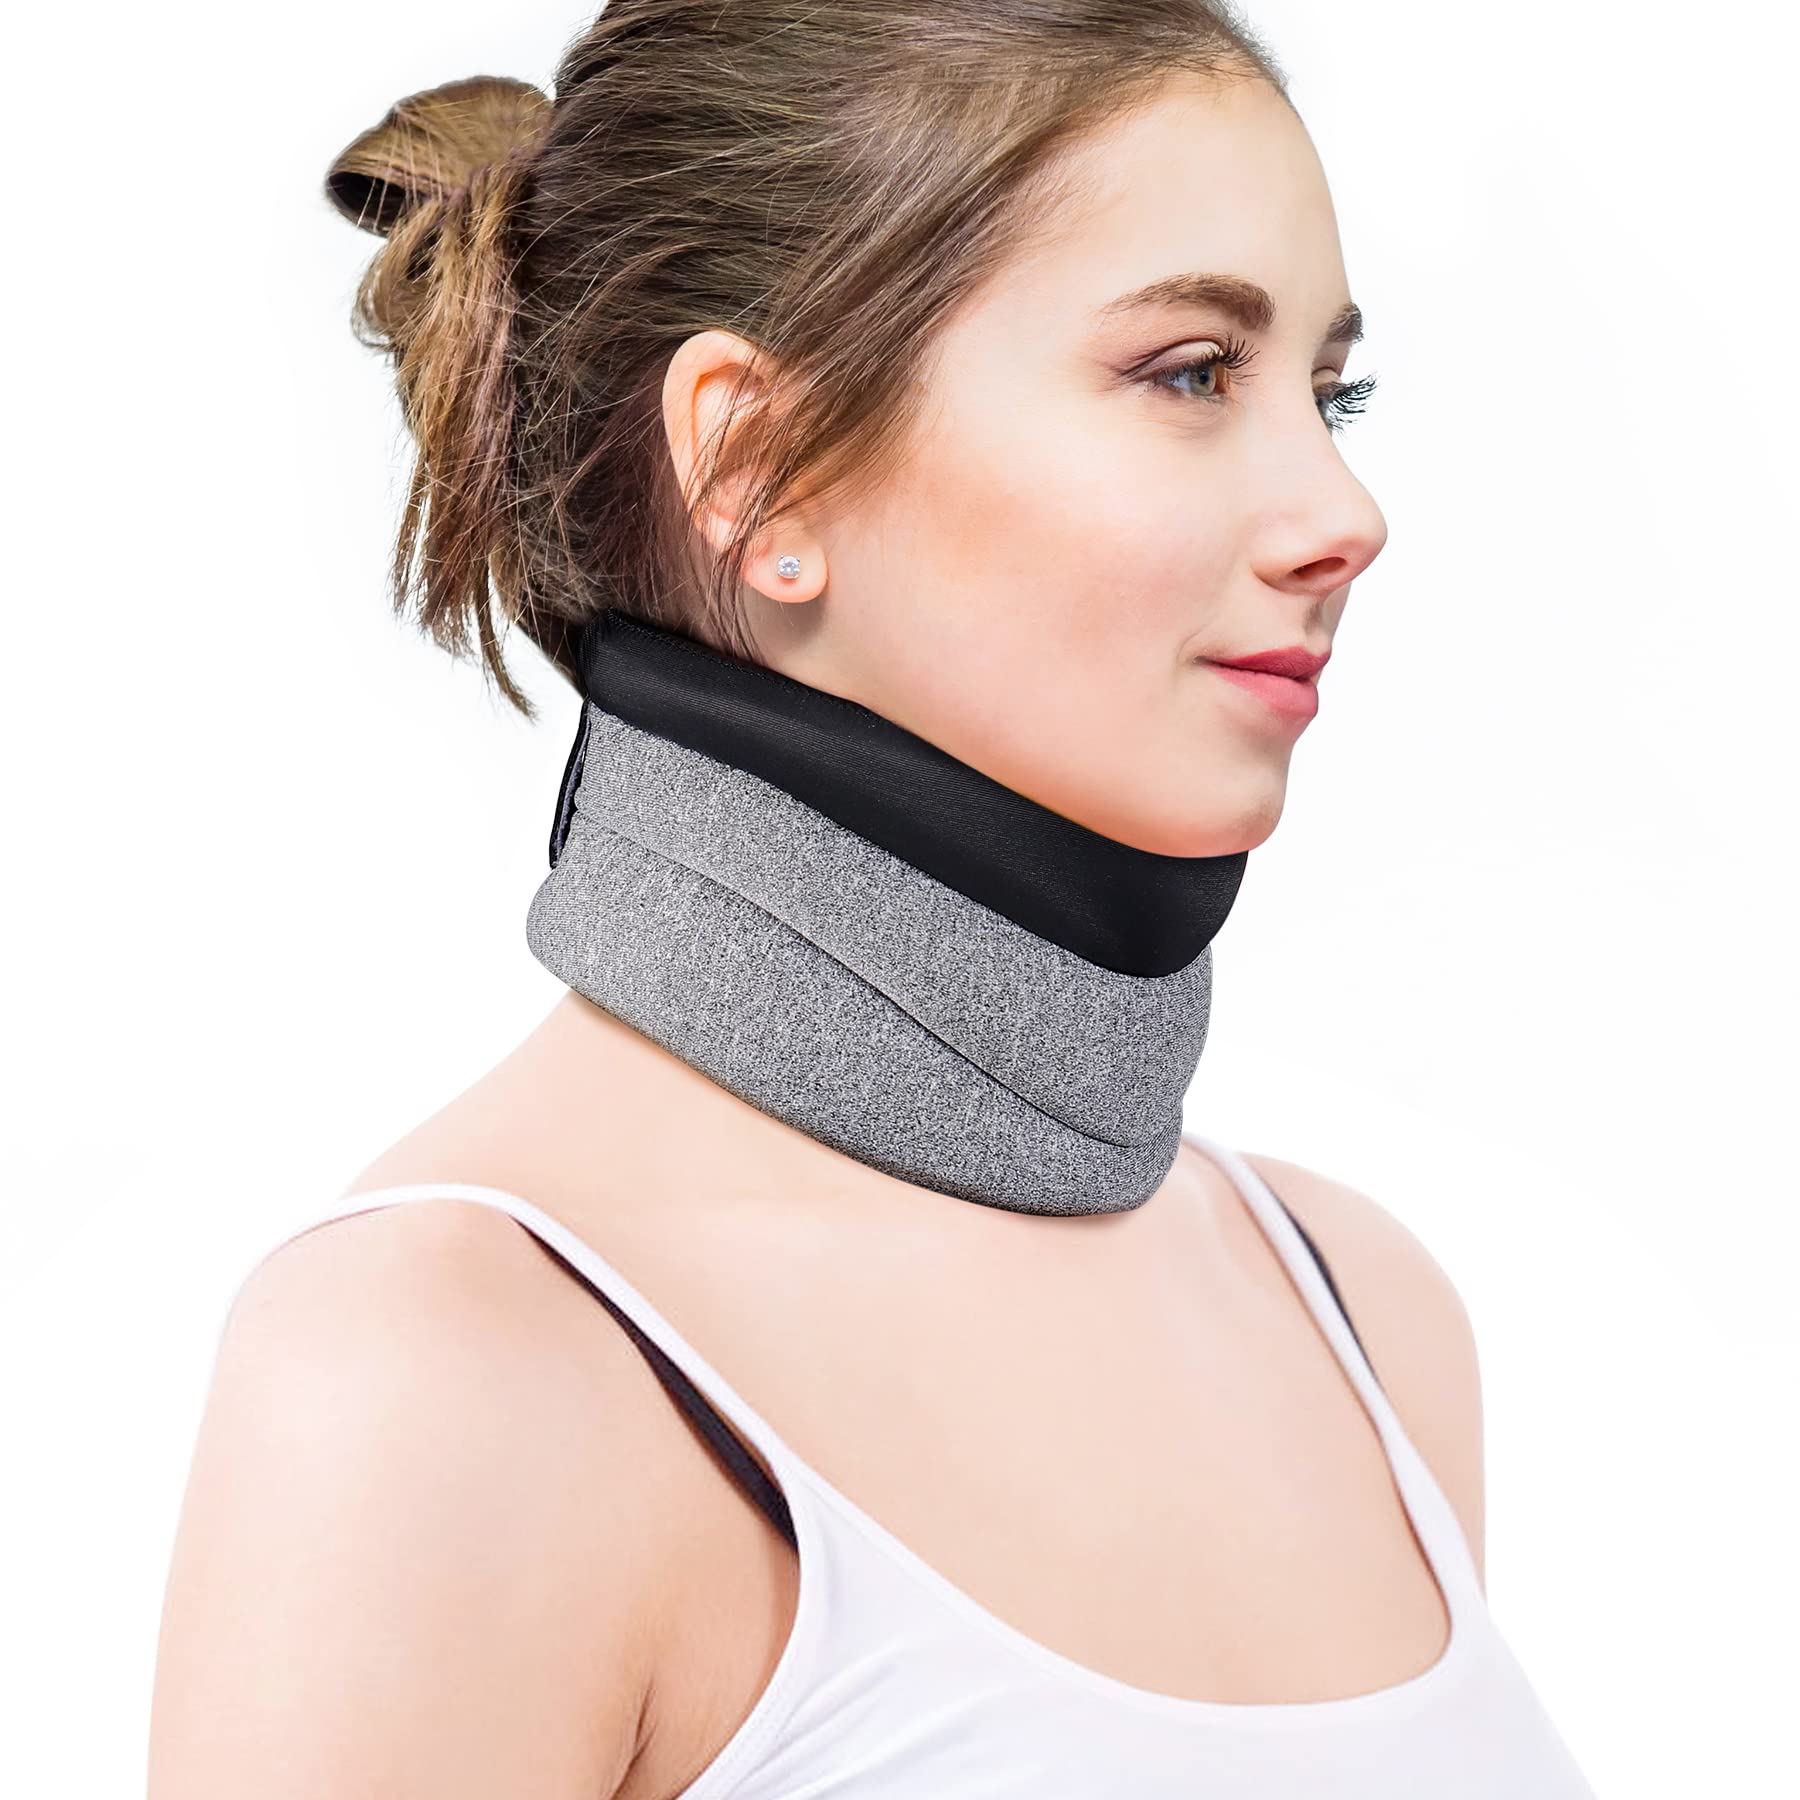 Neck Brace for Sleeping - Cervical Collar Relief Neck Pain and Neck Support  Soft Foam Wraps Keep Vertebrae Stable for Relief of Cervical Spine